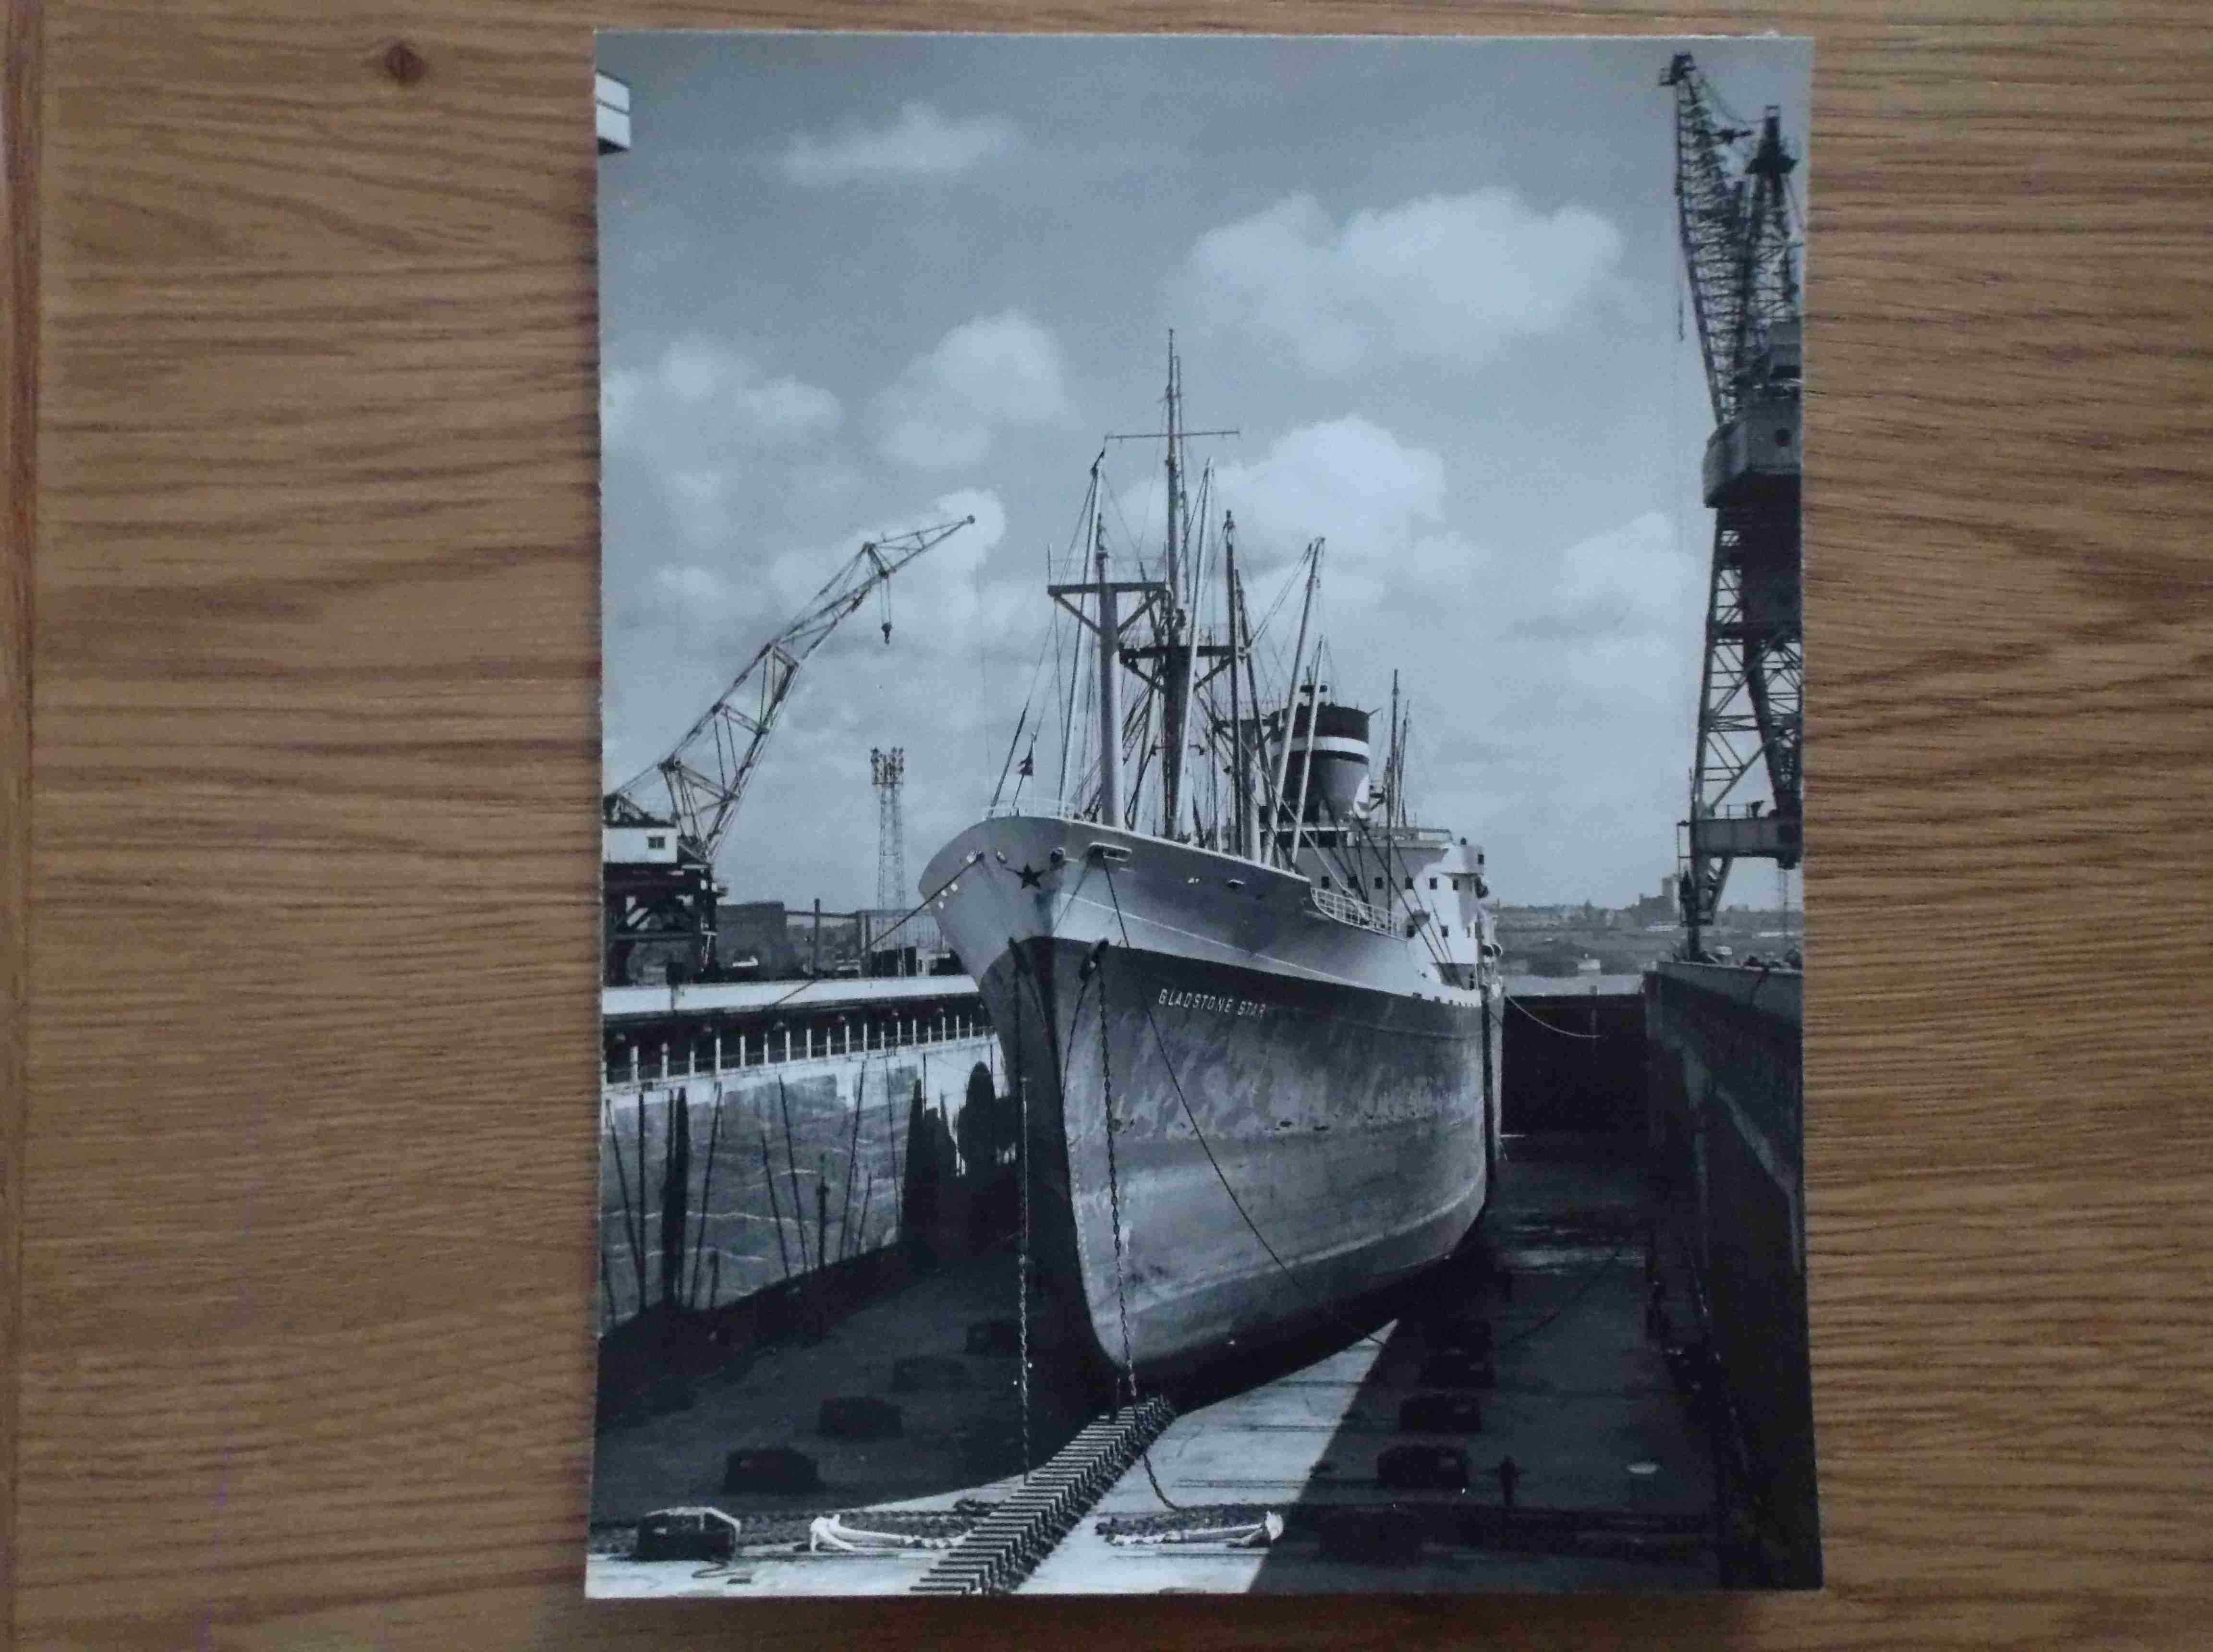 B/W PHOTOGRAPH OF THE BLUE STAR LINE VESSEL THE GLADSTONE STAR